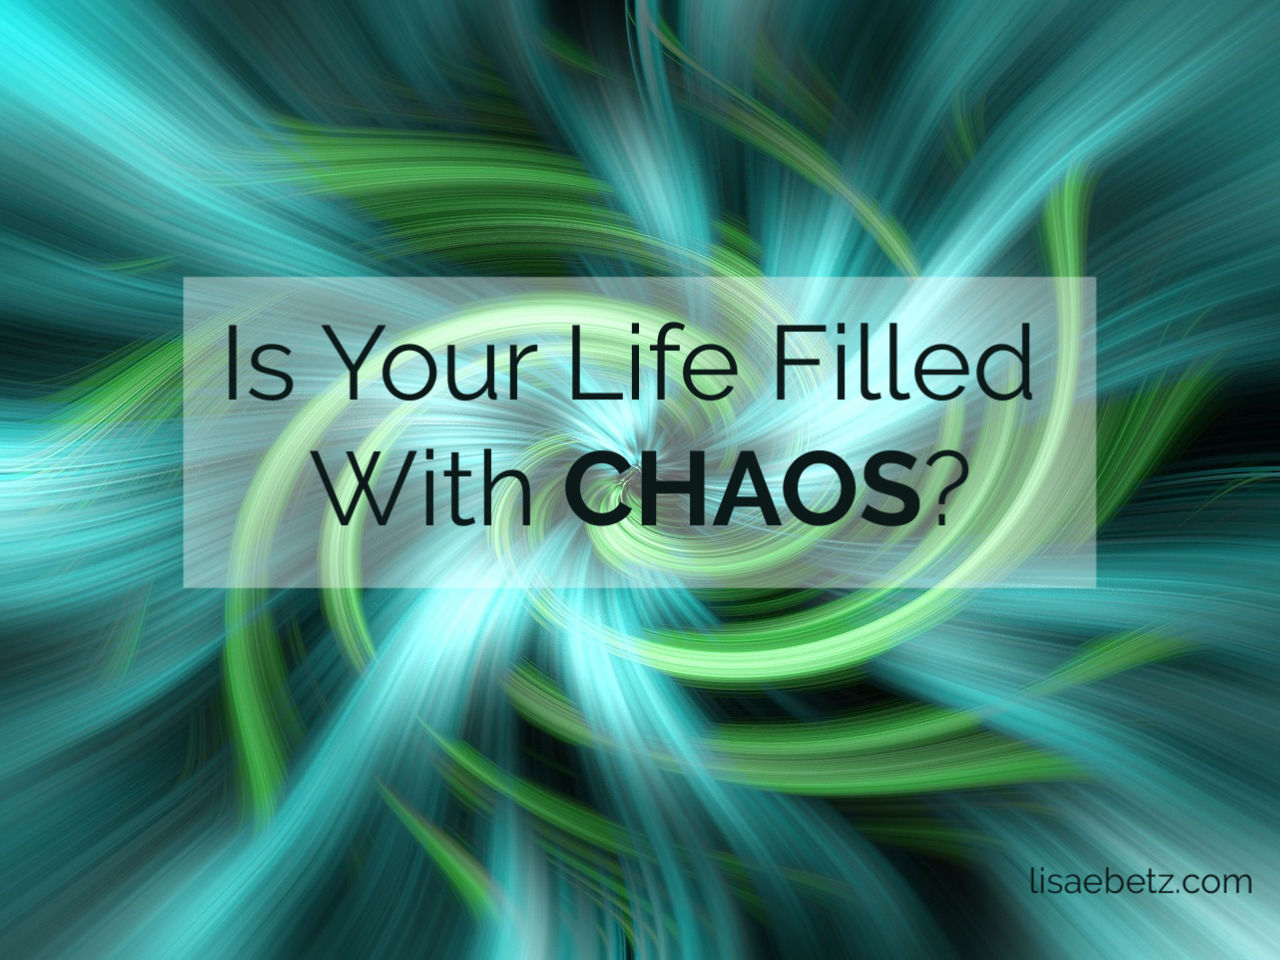 Is Your Life Filled With Chaos?